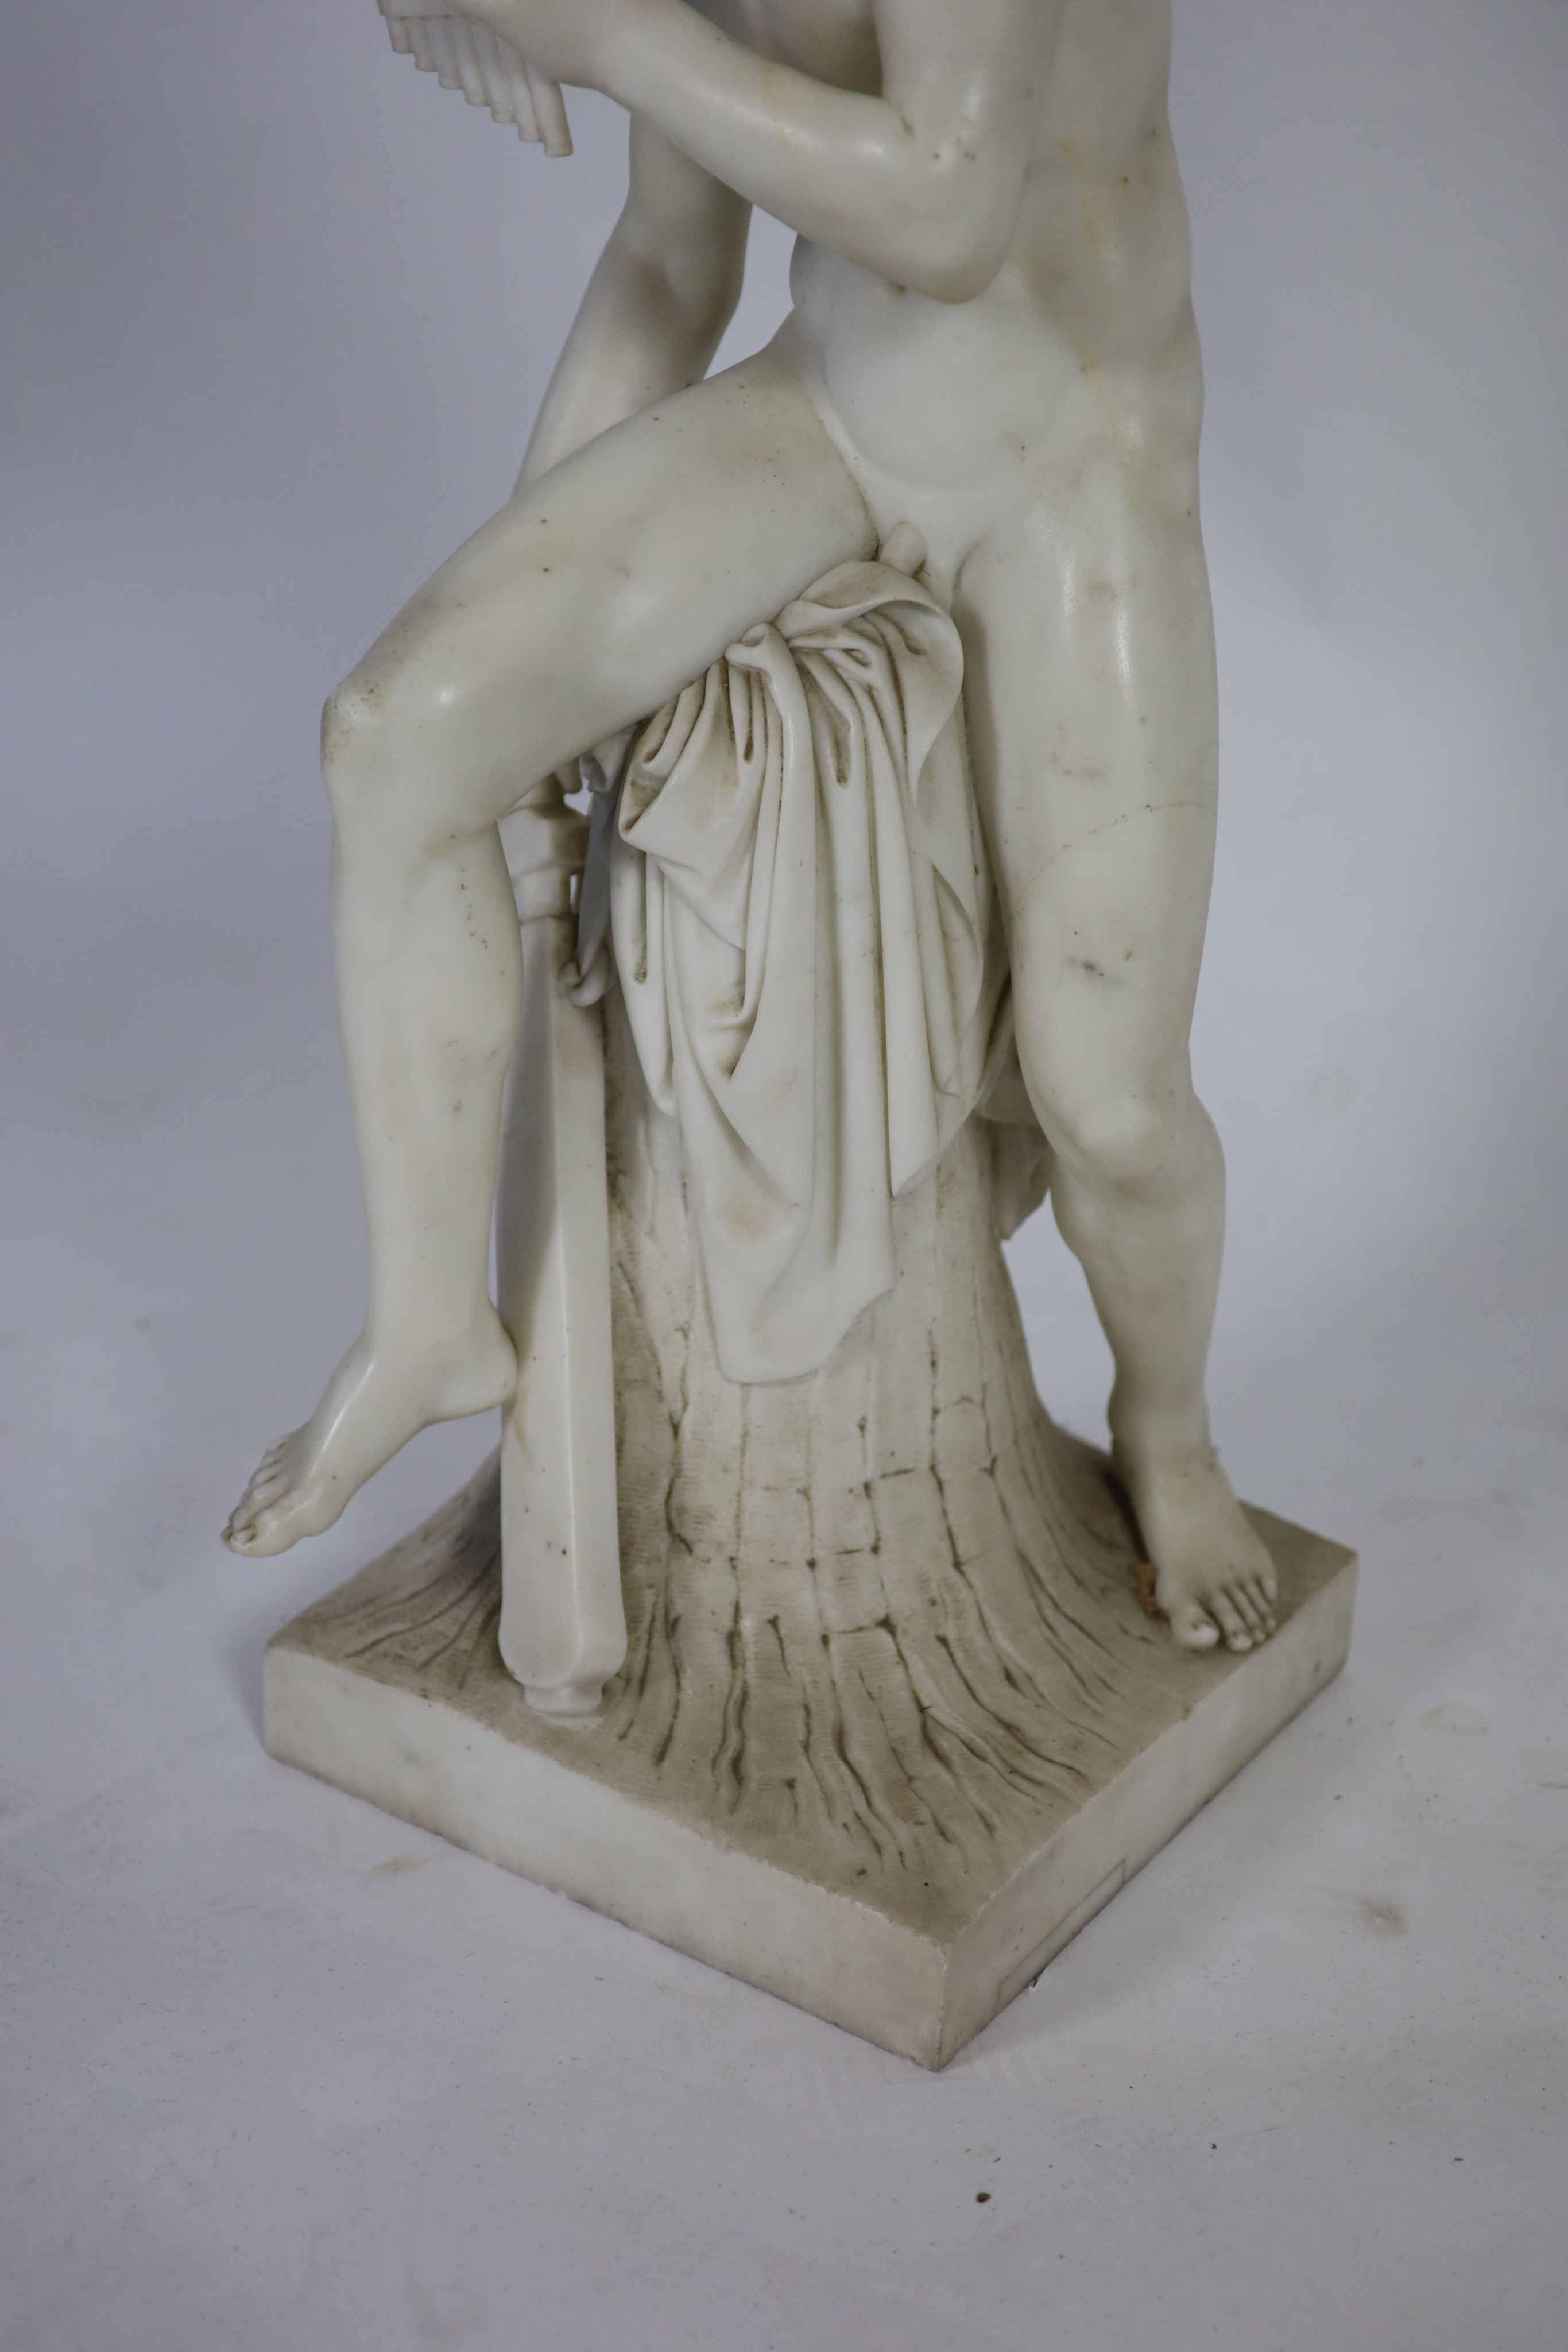 After Bertel Thorvaldsen (Danish 1770-1844). A Grand Tour white marble carving of Mercury about to kill Argus' width 31cm depth 32cm height 87cm